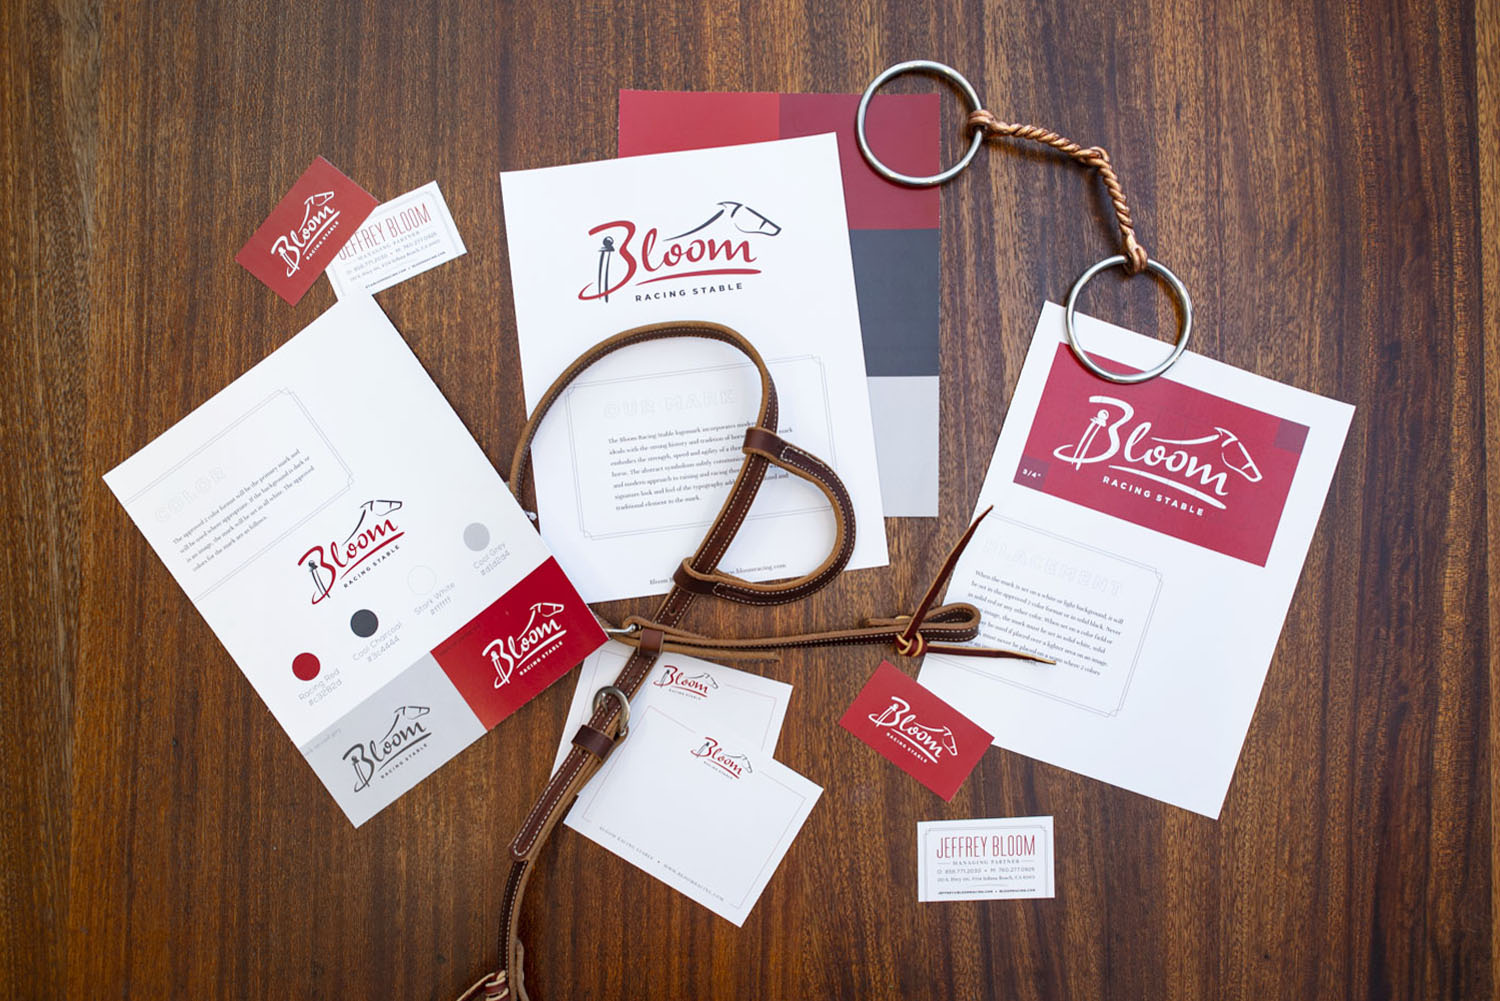 Stationery Design, business card and branding for Bloom Racing Stable, a boutique horse racing partnership in Solano Beach, California